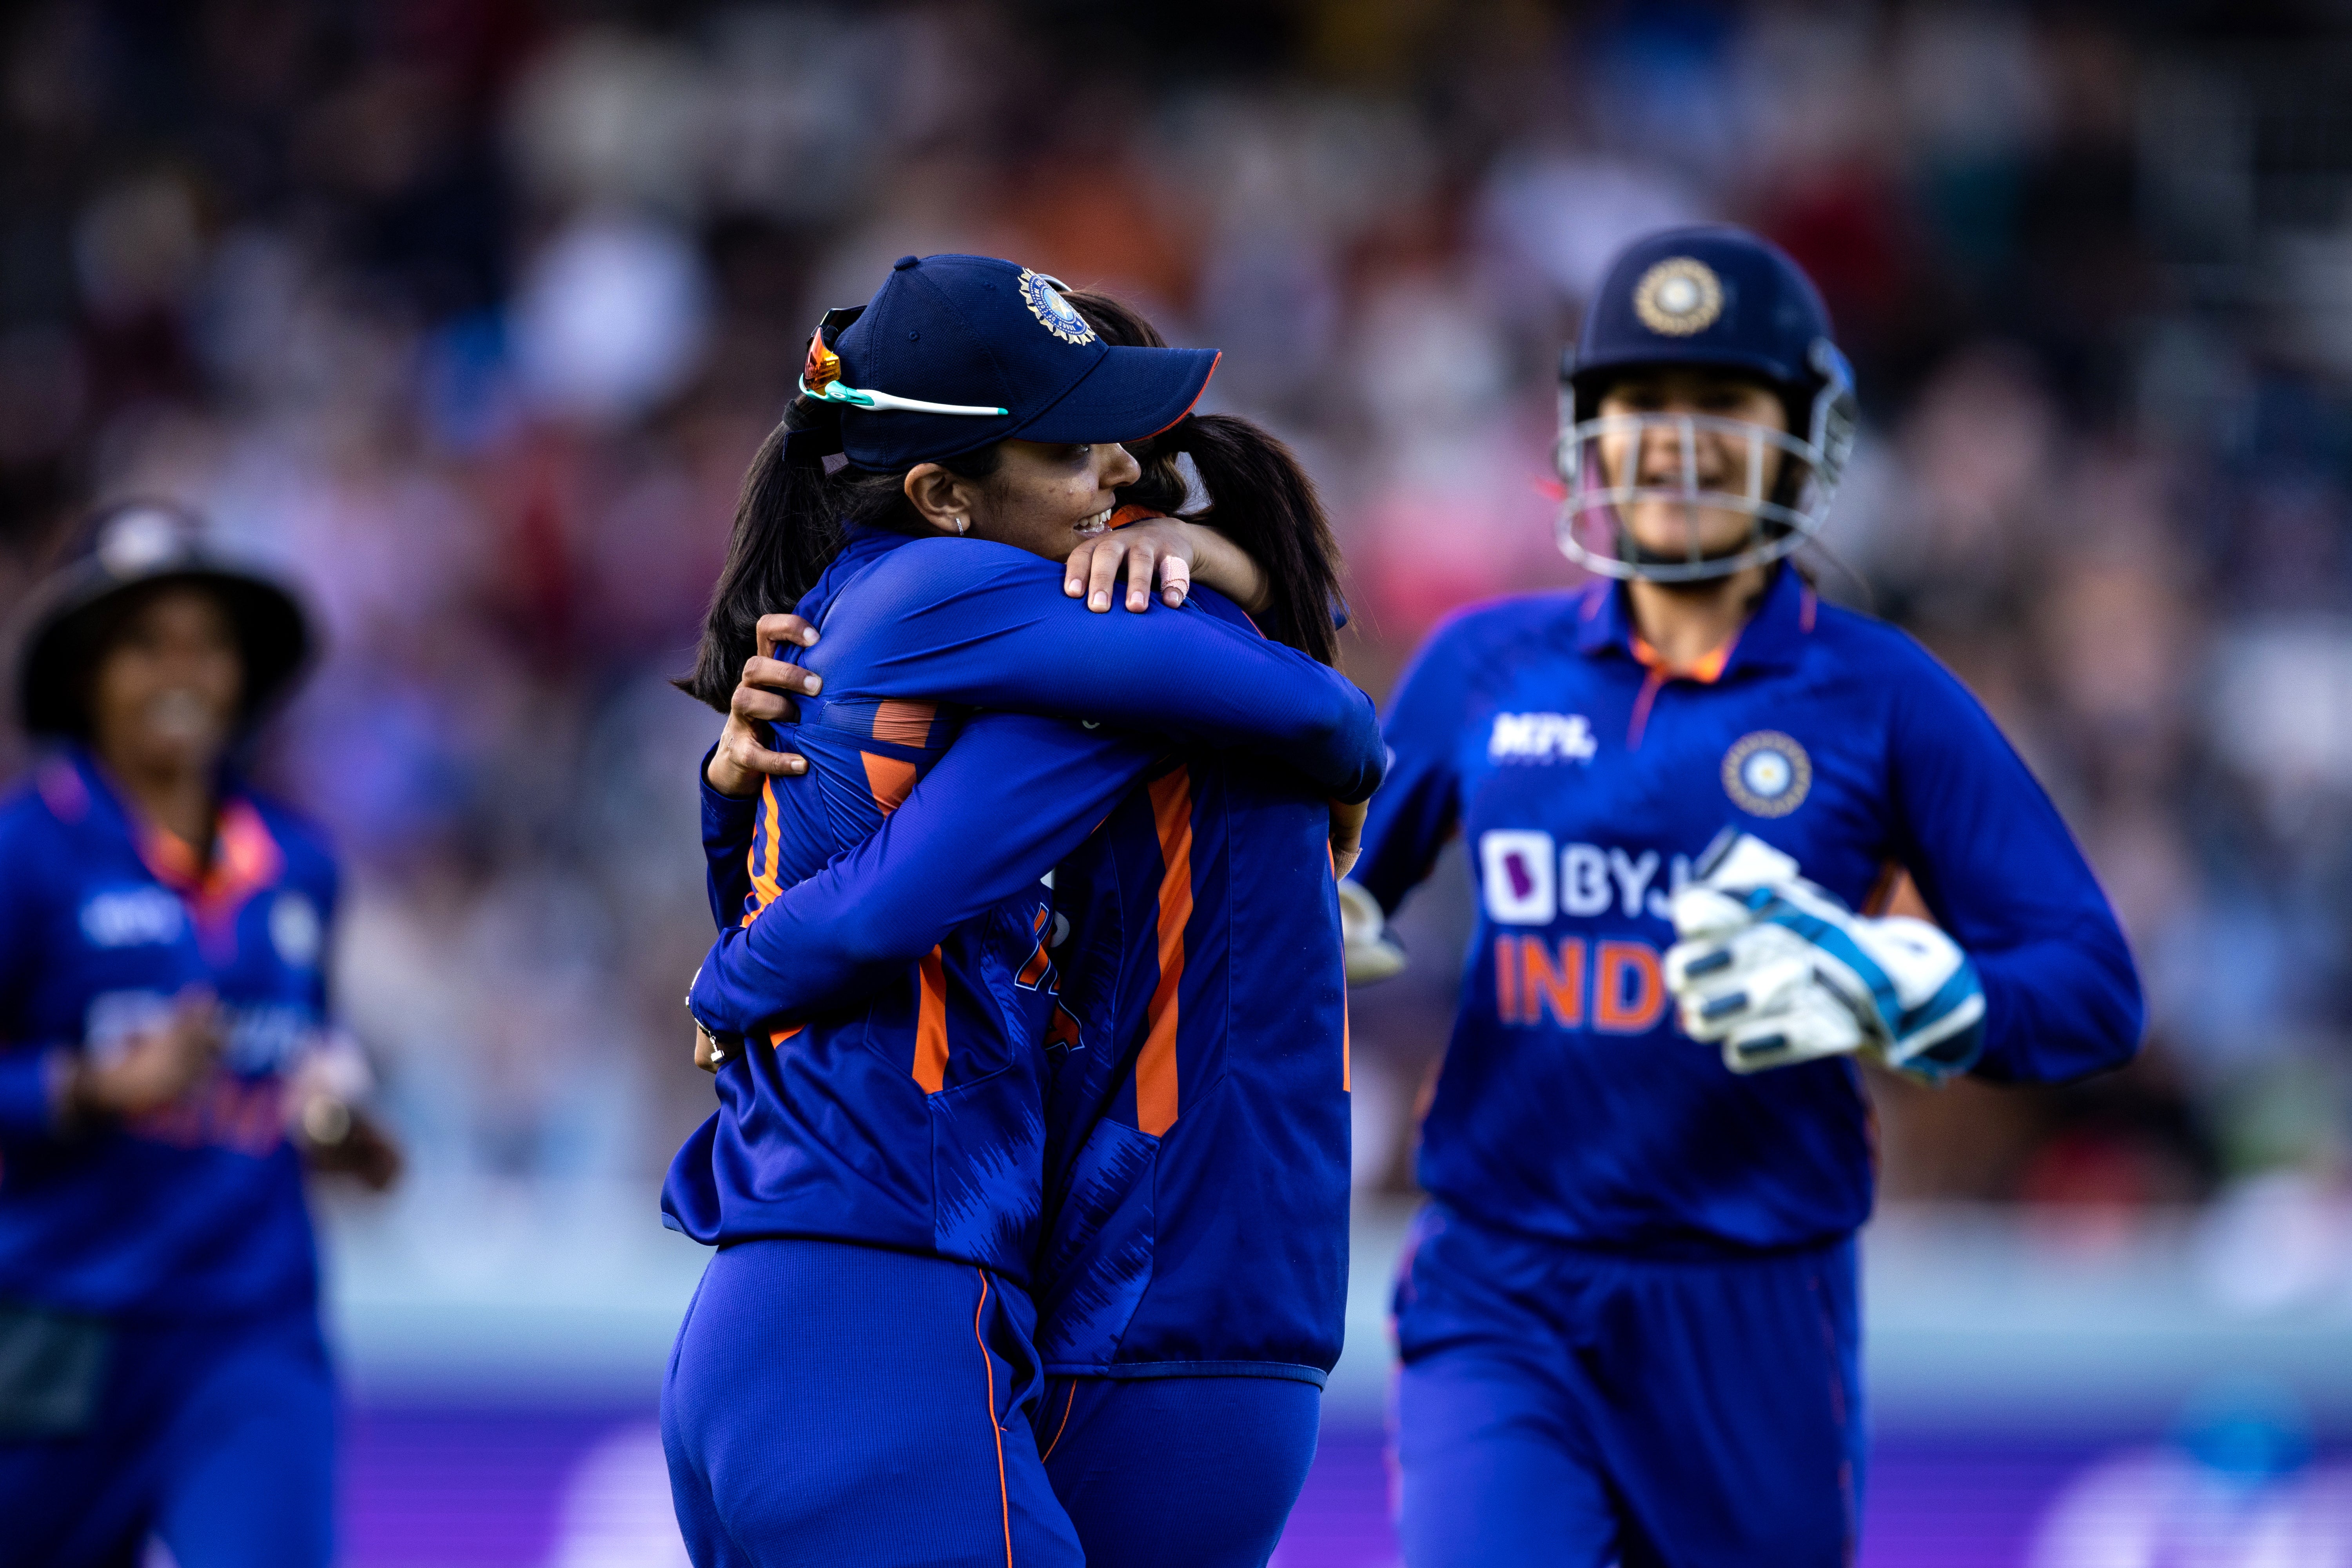 India celebrated victory after a controversial finish at Lord’s (Steven Paston/PA)